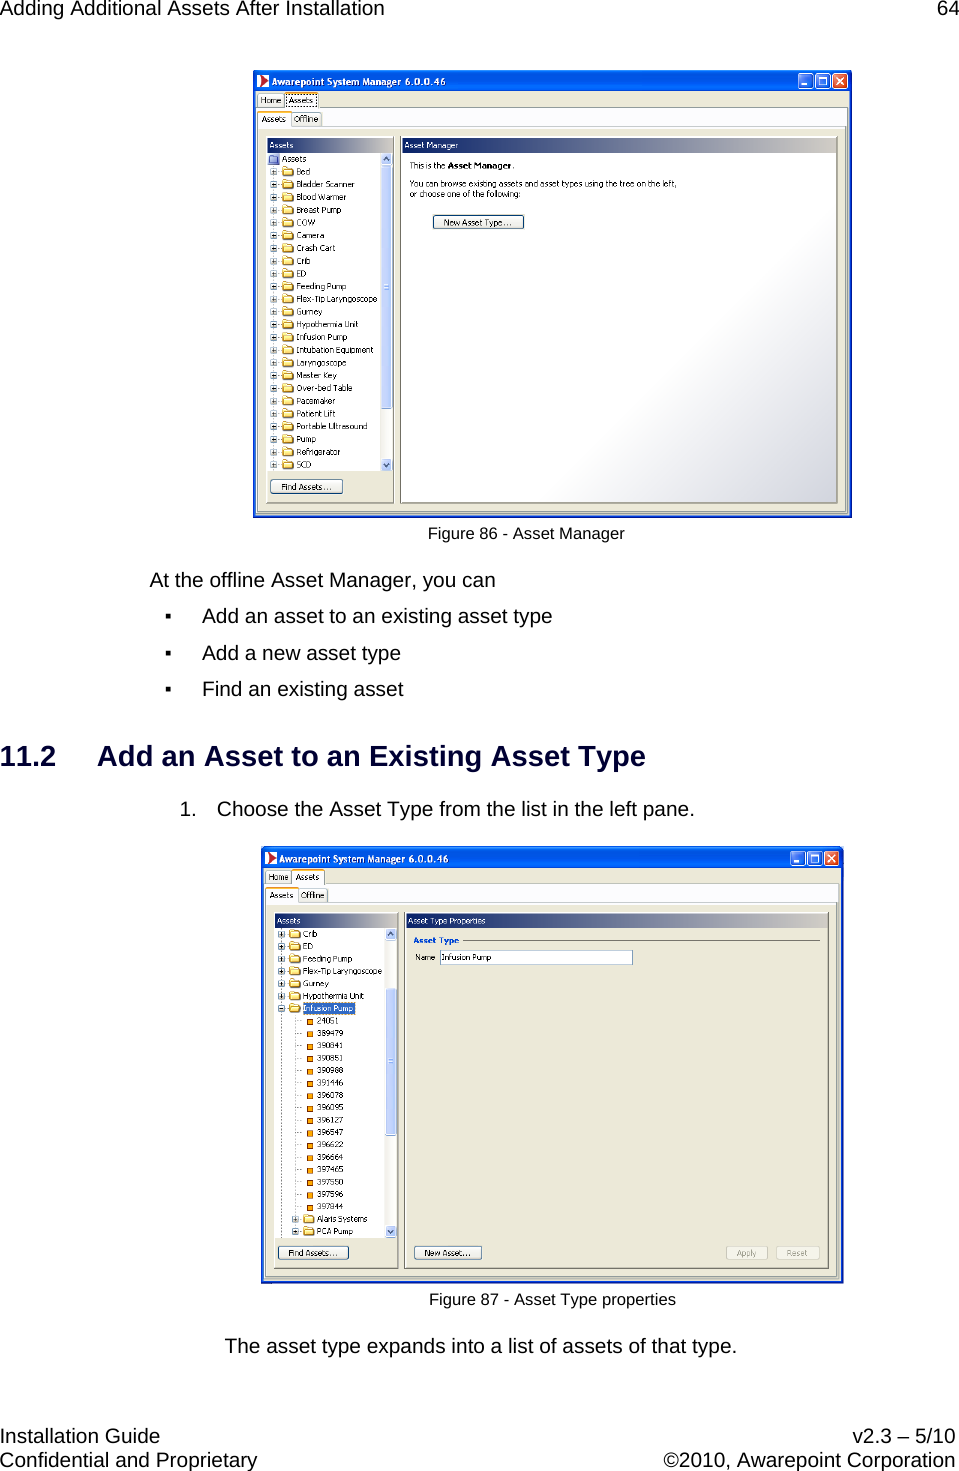 Adding Additional Assets After Installation    64   Installation Guide    v2.3 – 5/10 Confidential and Proprietary    ©2010, Awarepoint Corporation   Figure 86 - Asset Manager At the offline Asset Manager, you can ▪ Add an asset to an existing asset type ▪ Add a new asset type ▪ Find an existing asset 11.2 Add an Asset to an Existing Asset Type 1. Choose the Asset Type from the list in the left pane.  Figure 87 - Asset Type properties The asset type expands into a list of assets of that type. 